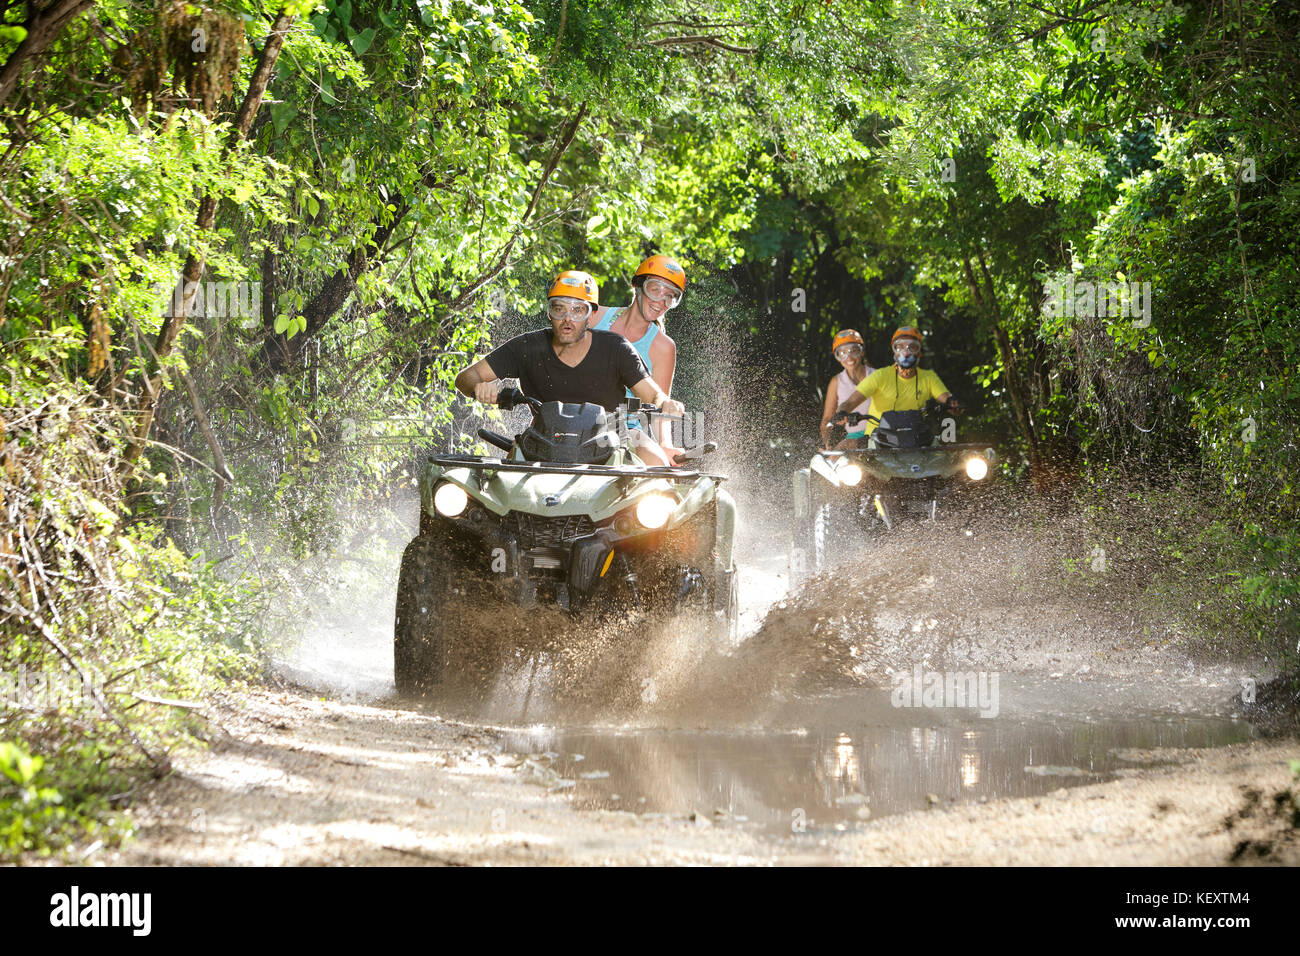 Front view of couples driving quad bikes through dirt road puddles in Emotions Native Park, Quintana Roo, Mexico Stock Photo